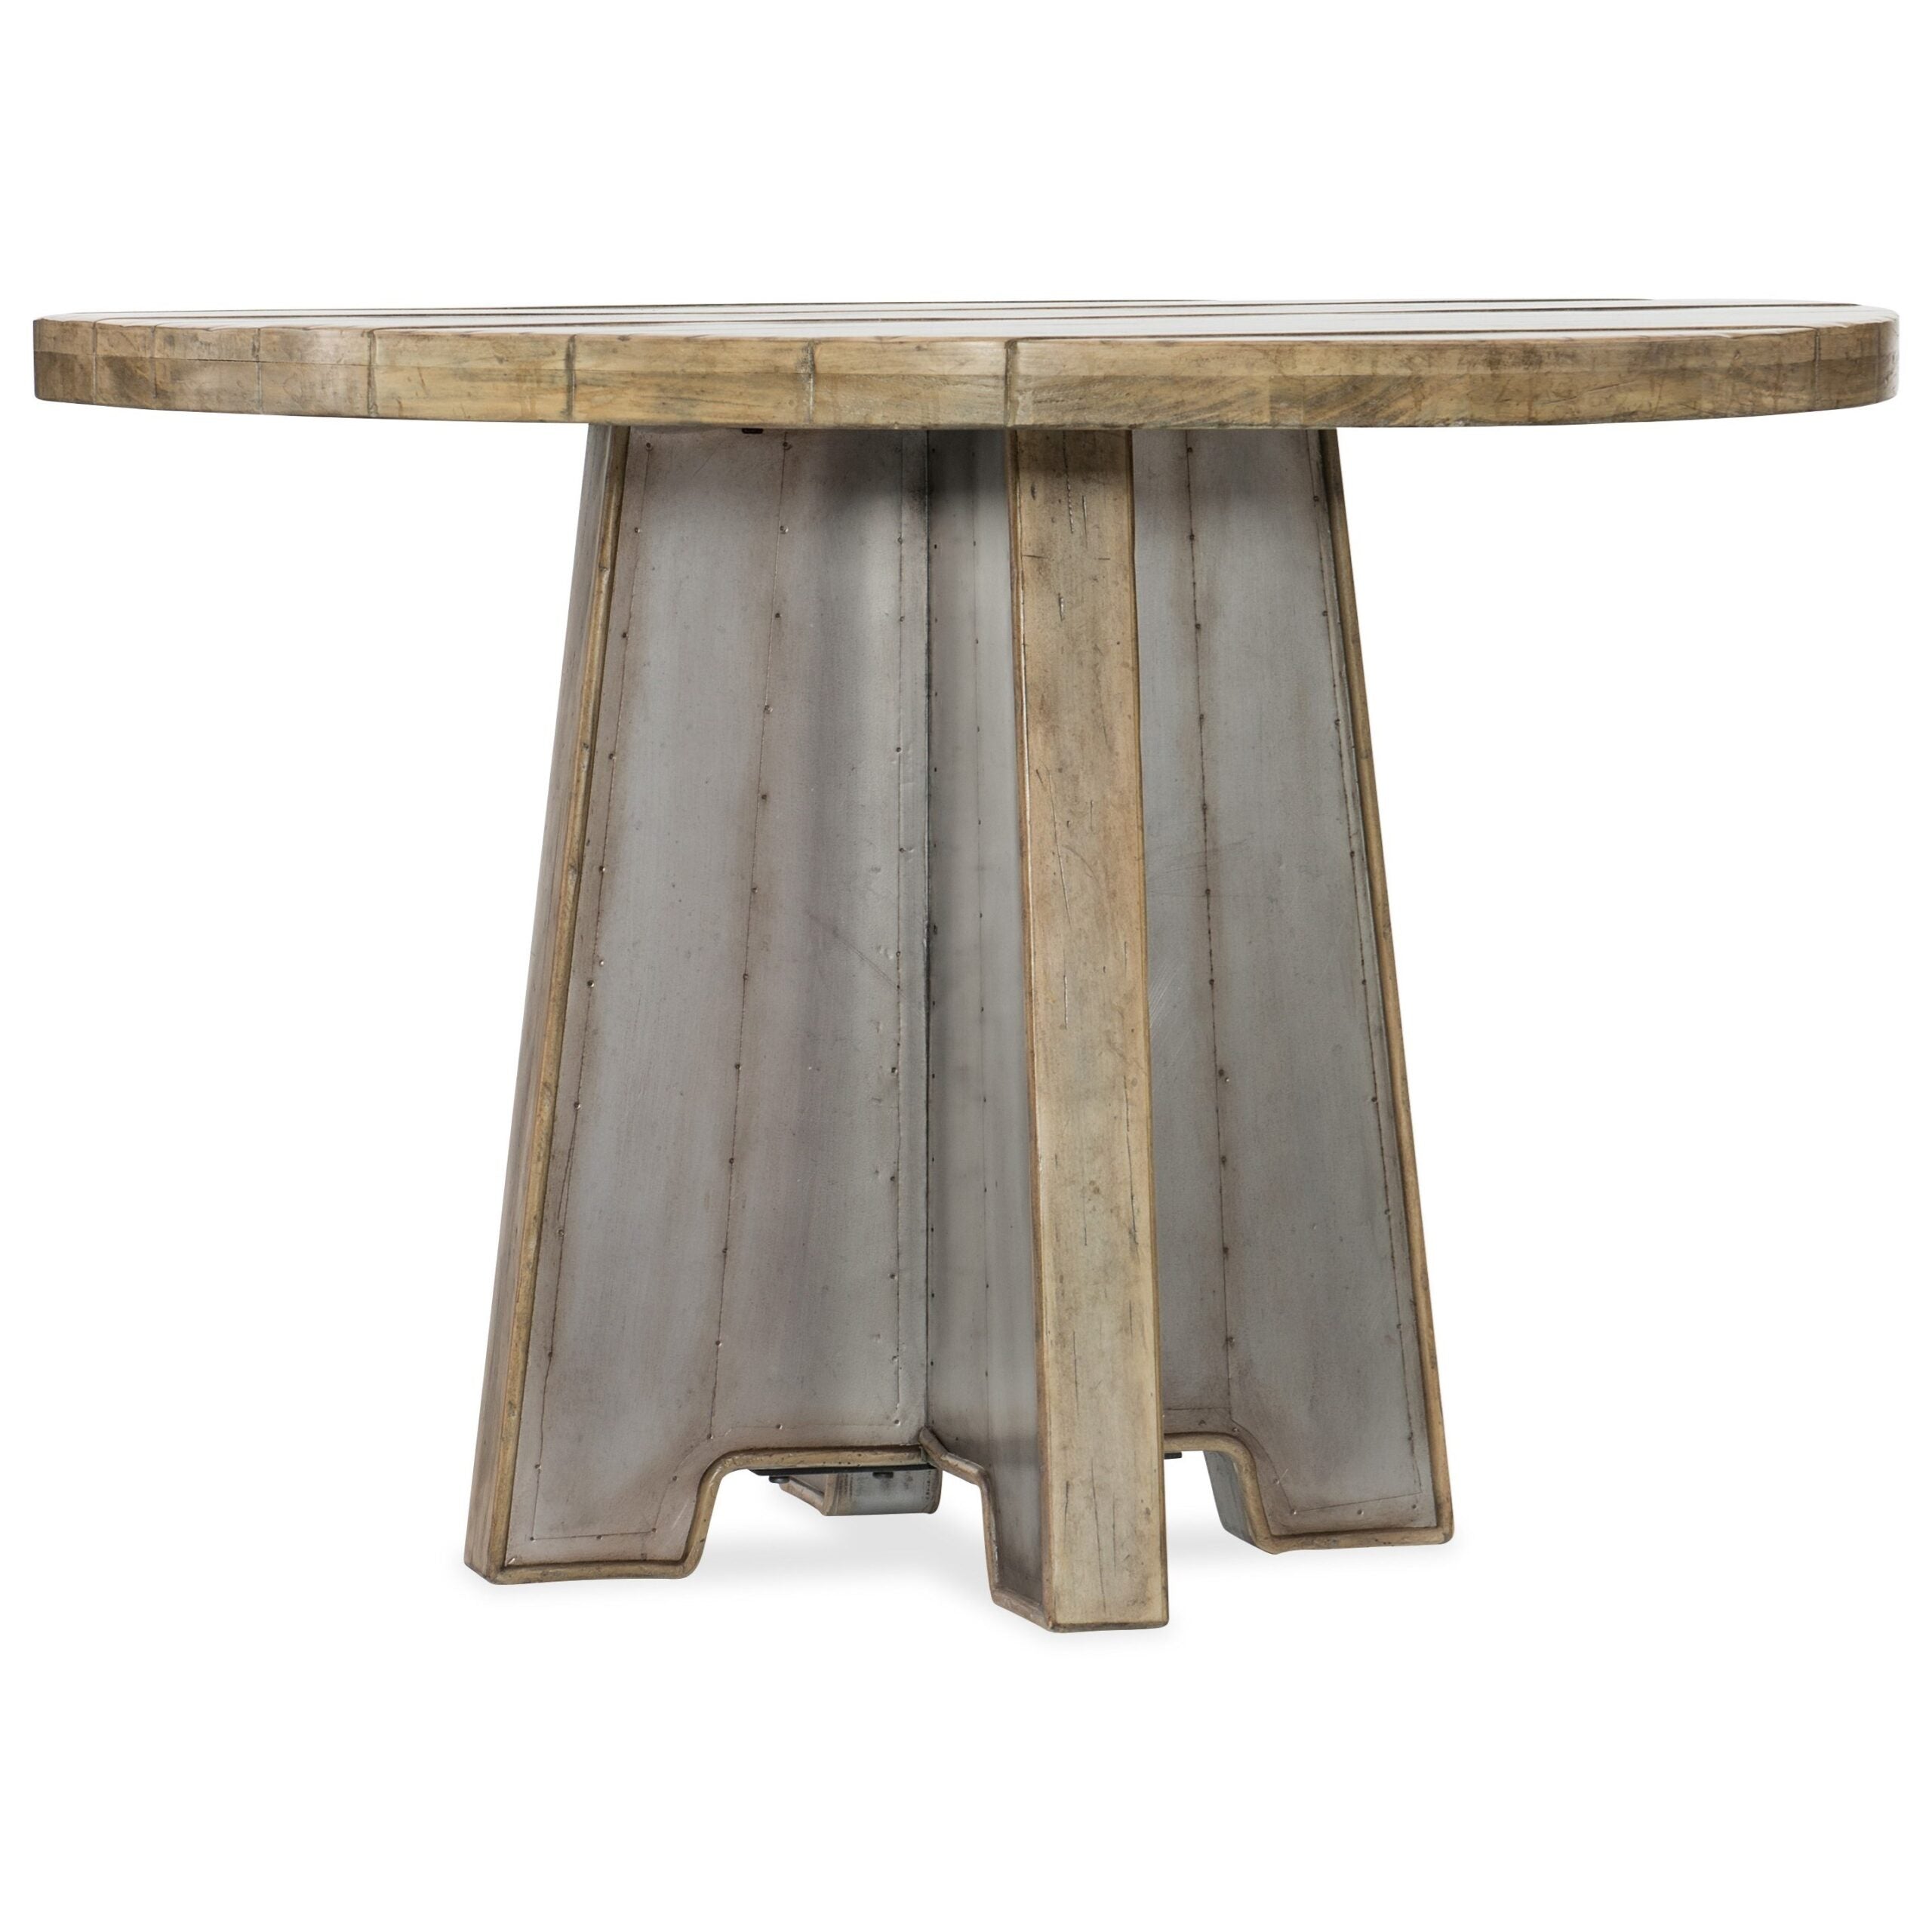 Hooker Urban Elevation Rustic 54 Round Dining Table 1620 75213 Lt